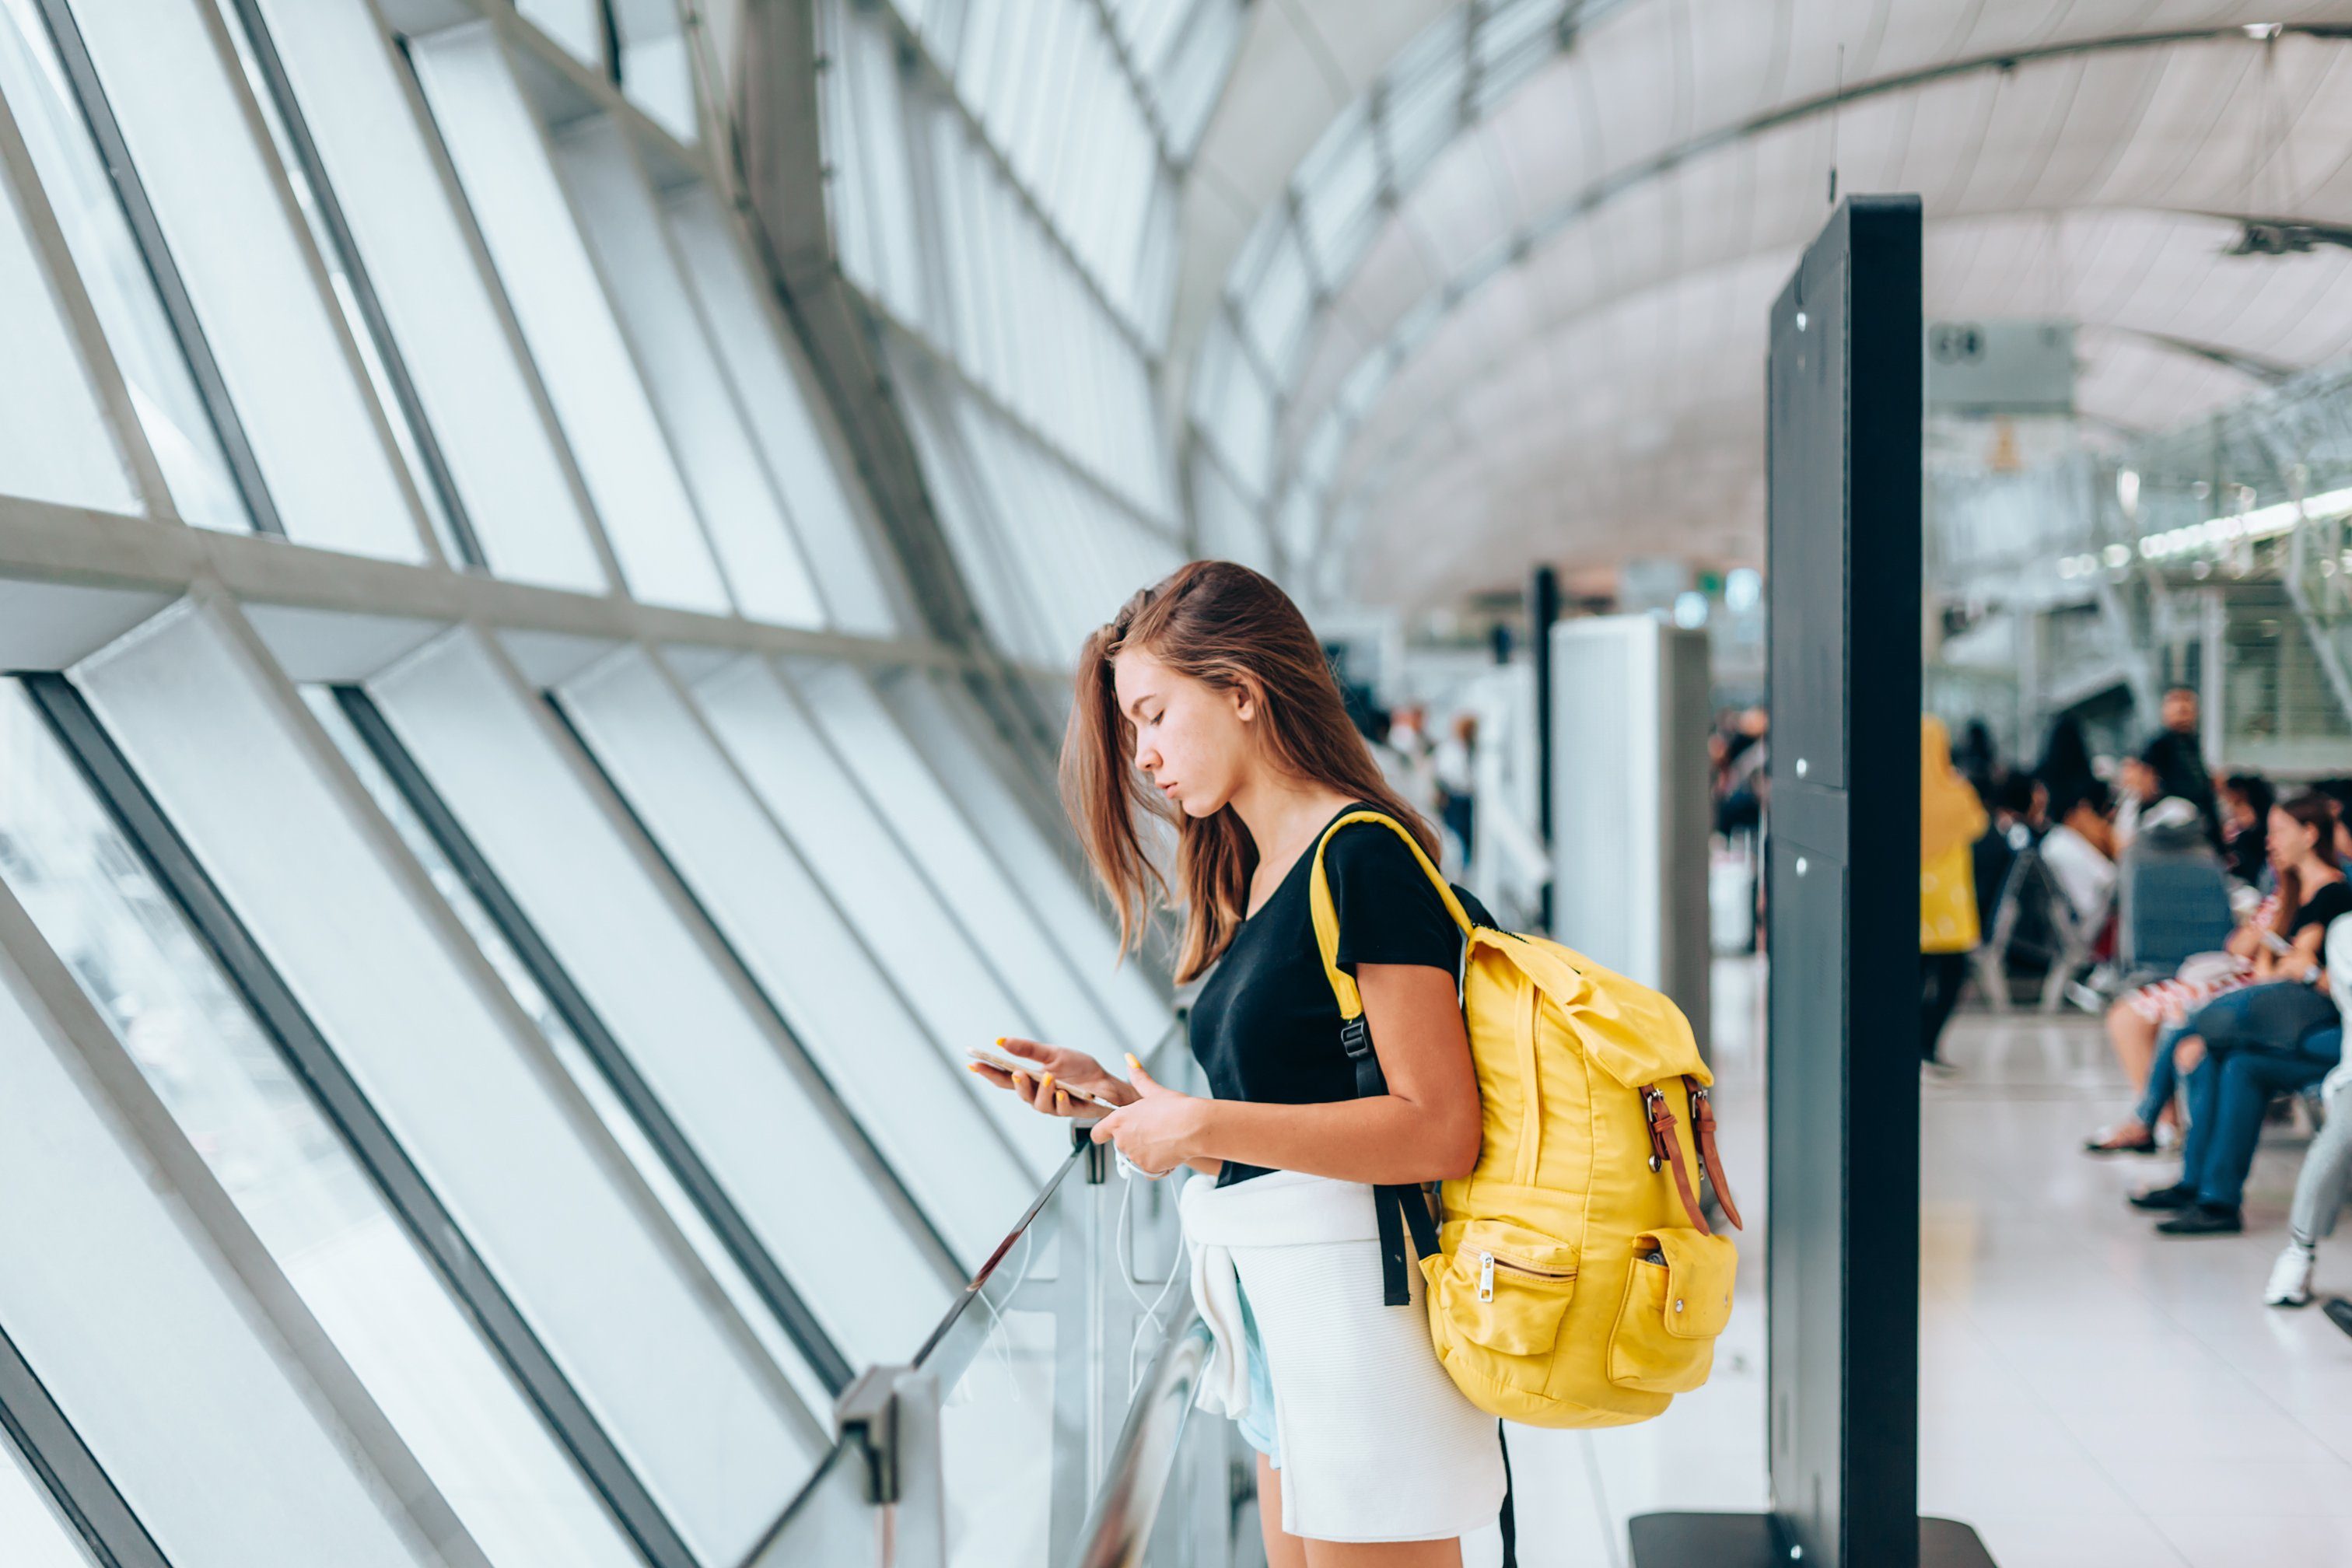 Teen girl using smarthphone while waiting for international flight in airport departure terminal. Young passenger with backpack travelling on airplane. Teenager tourizm abroad alone concept.